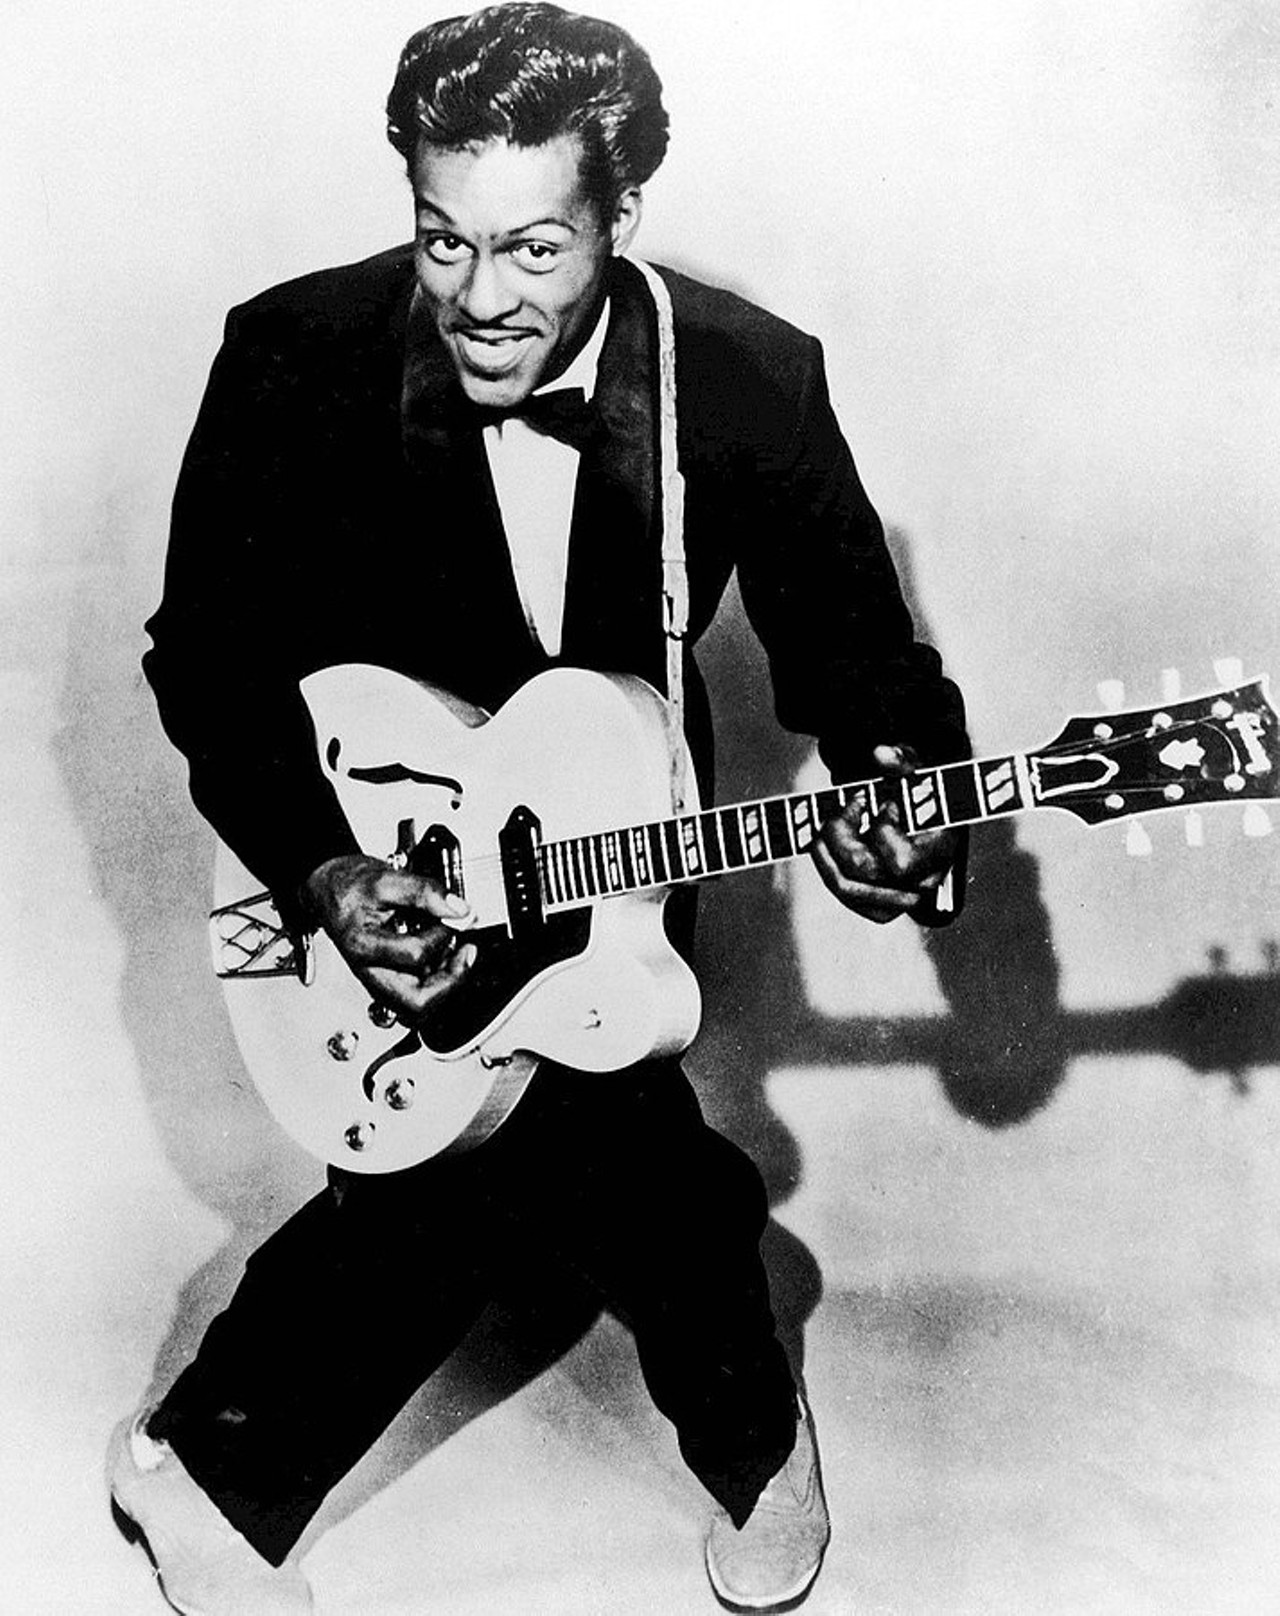 Chuck Berry
Known as the godfather of rock and roll, Chuck Berry was a singer, songwriter and longtime St. Louis booster.
Photo credit: Wikimedia Commons